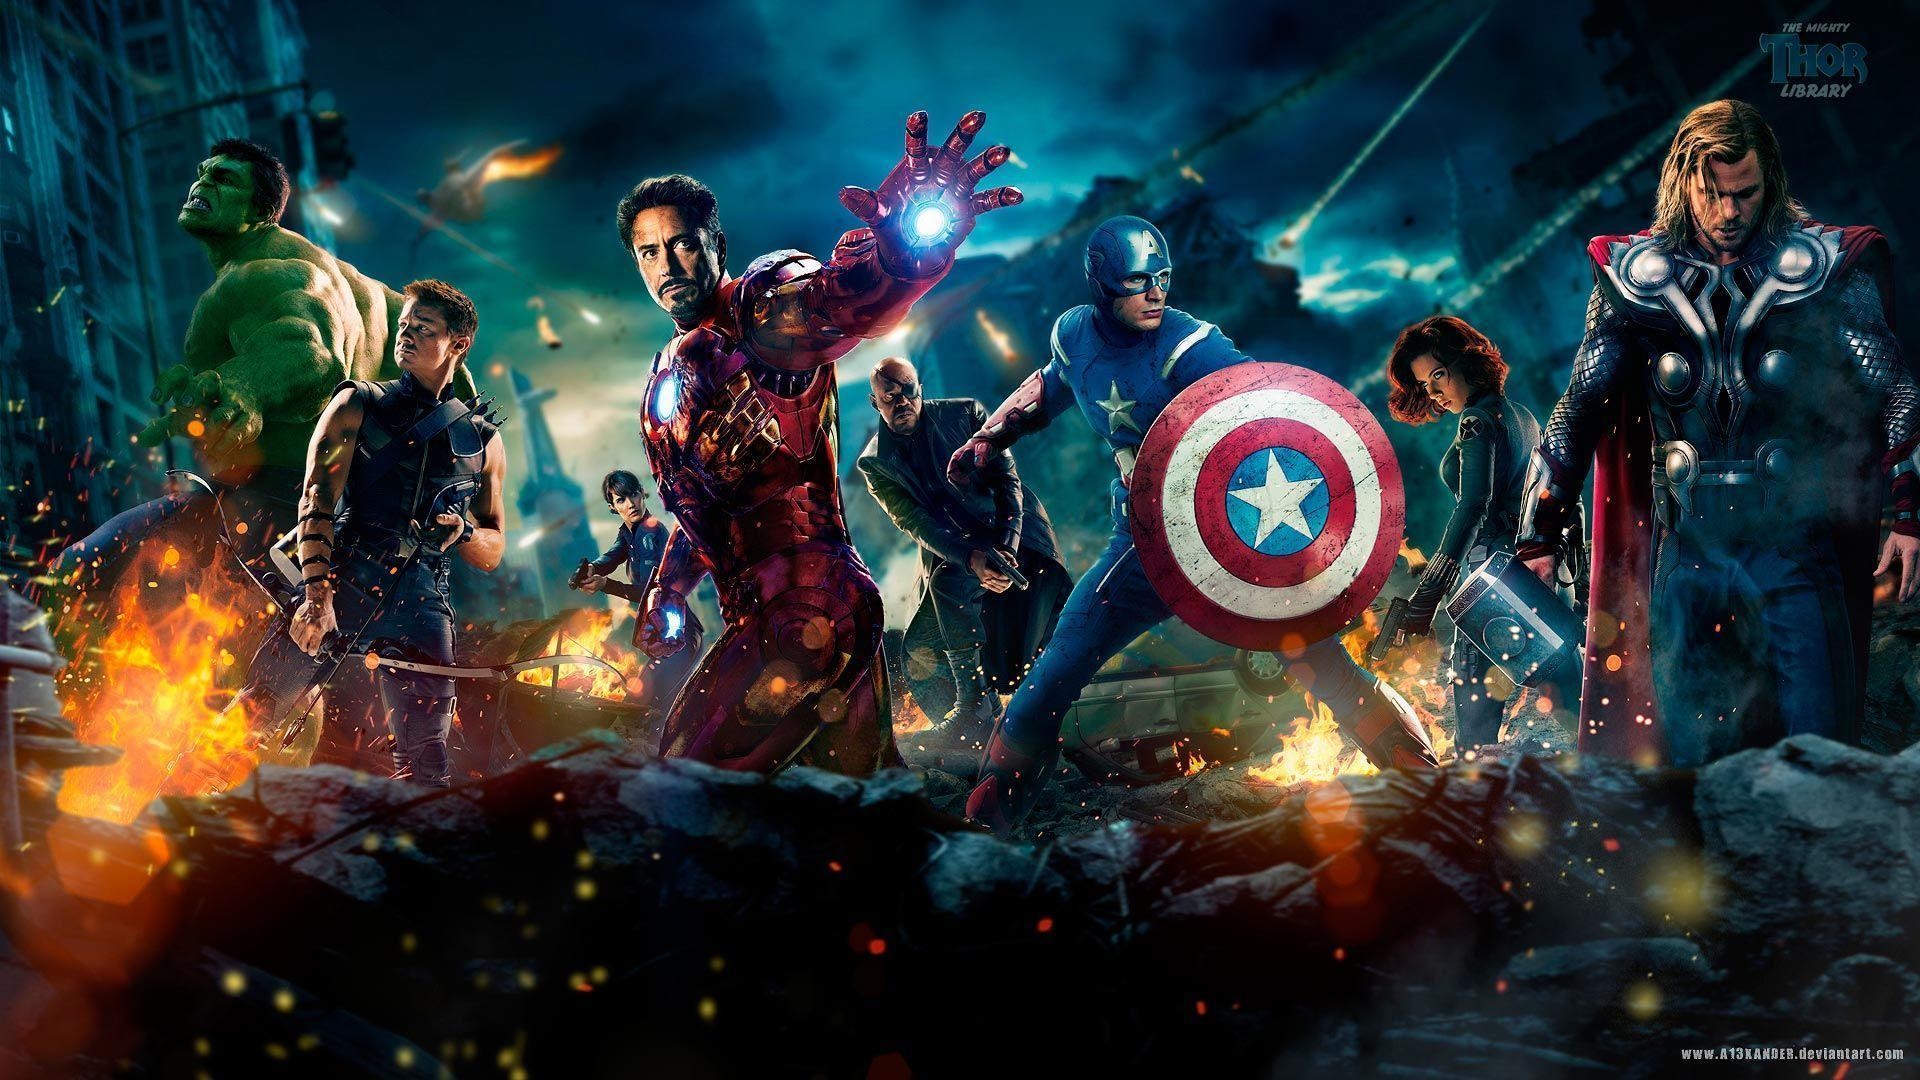 1920x1080 Captain America Wallpapers (Image Gallery) - HD wallpapers 1080p